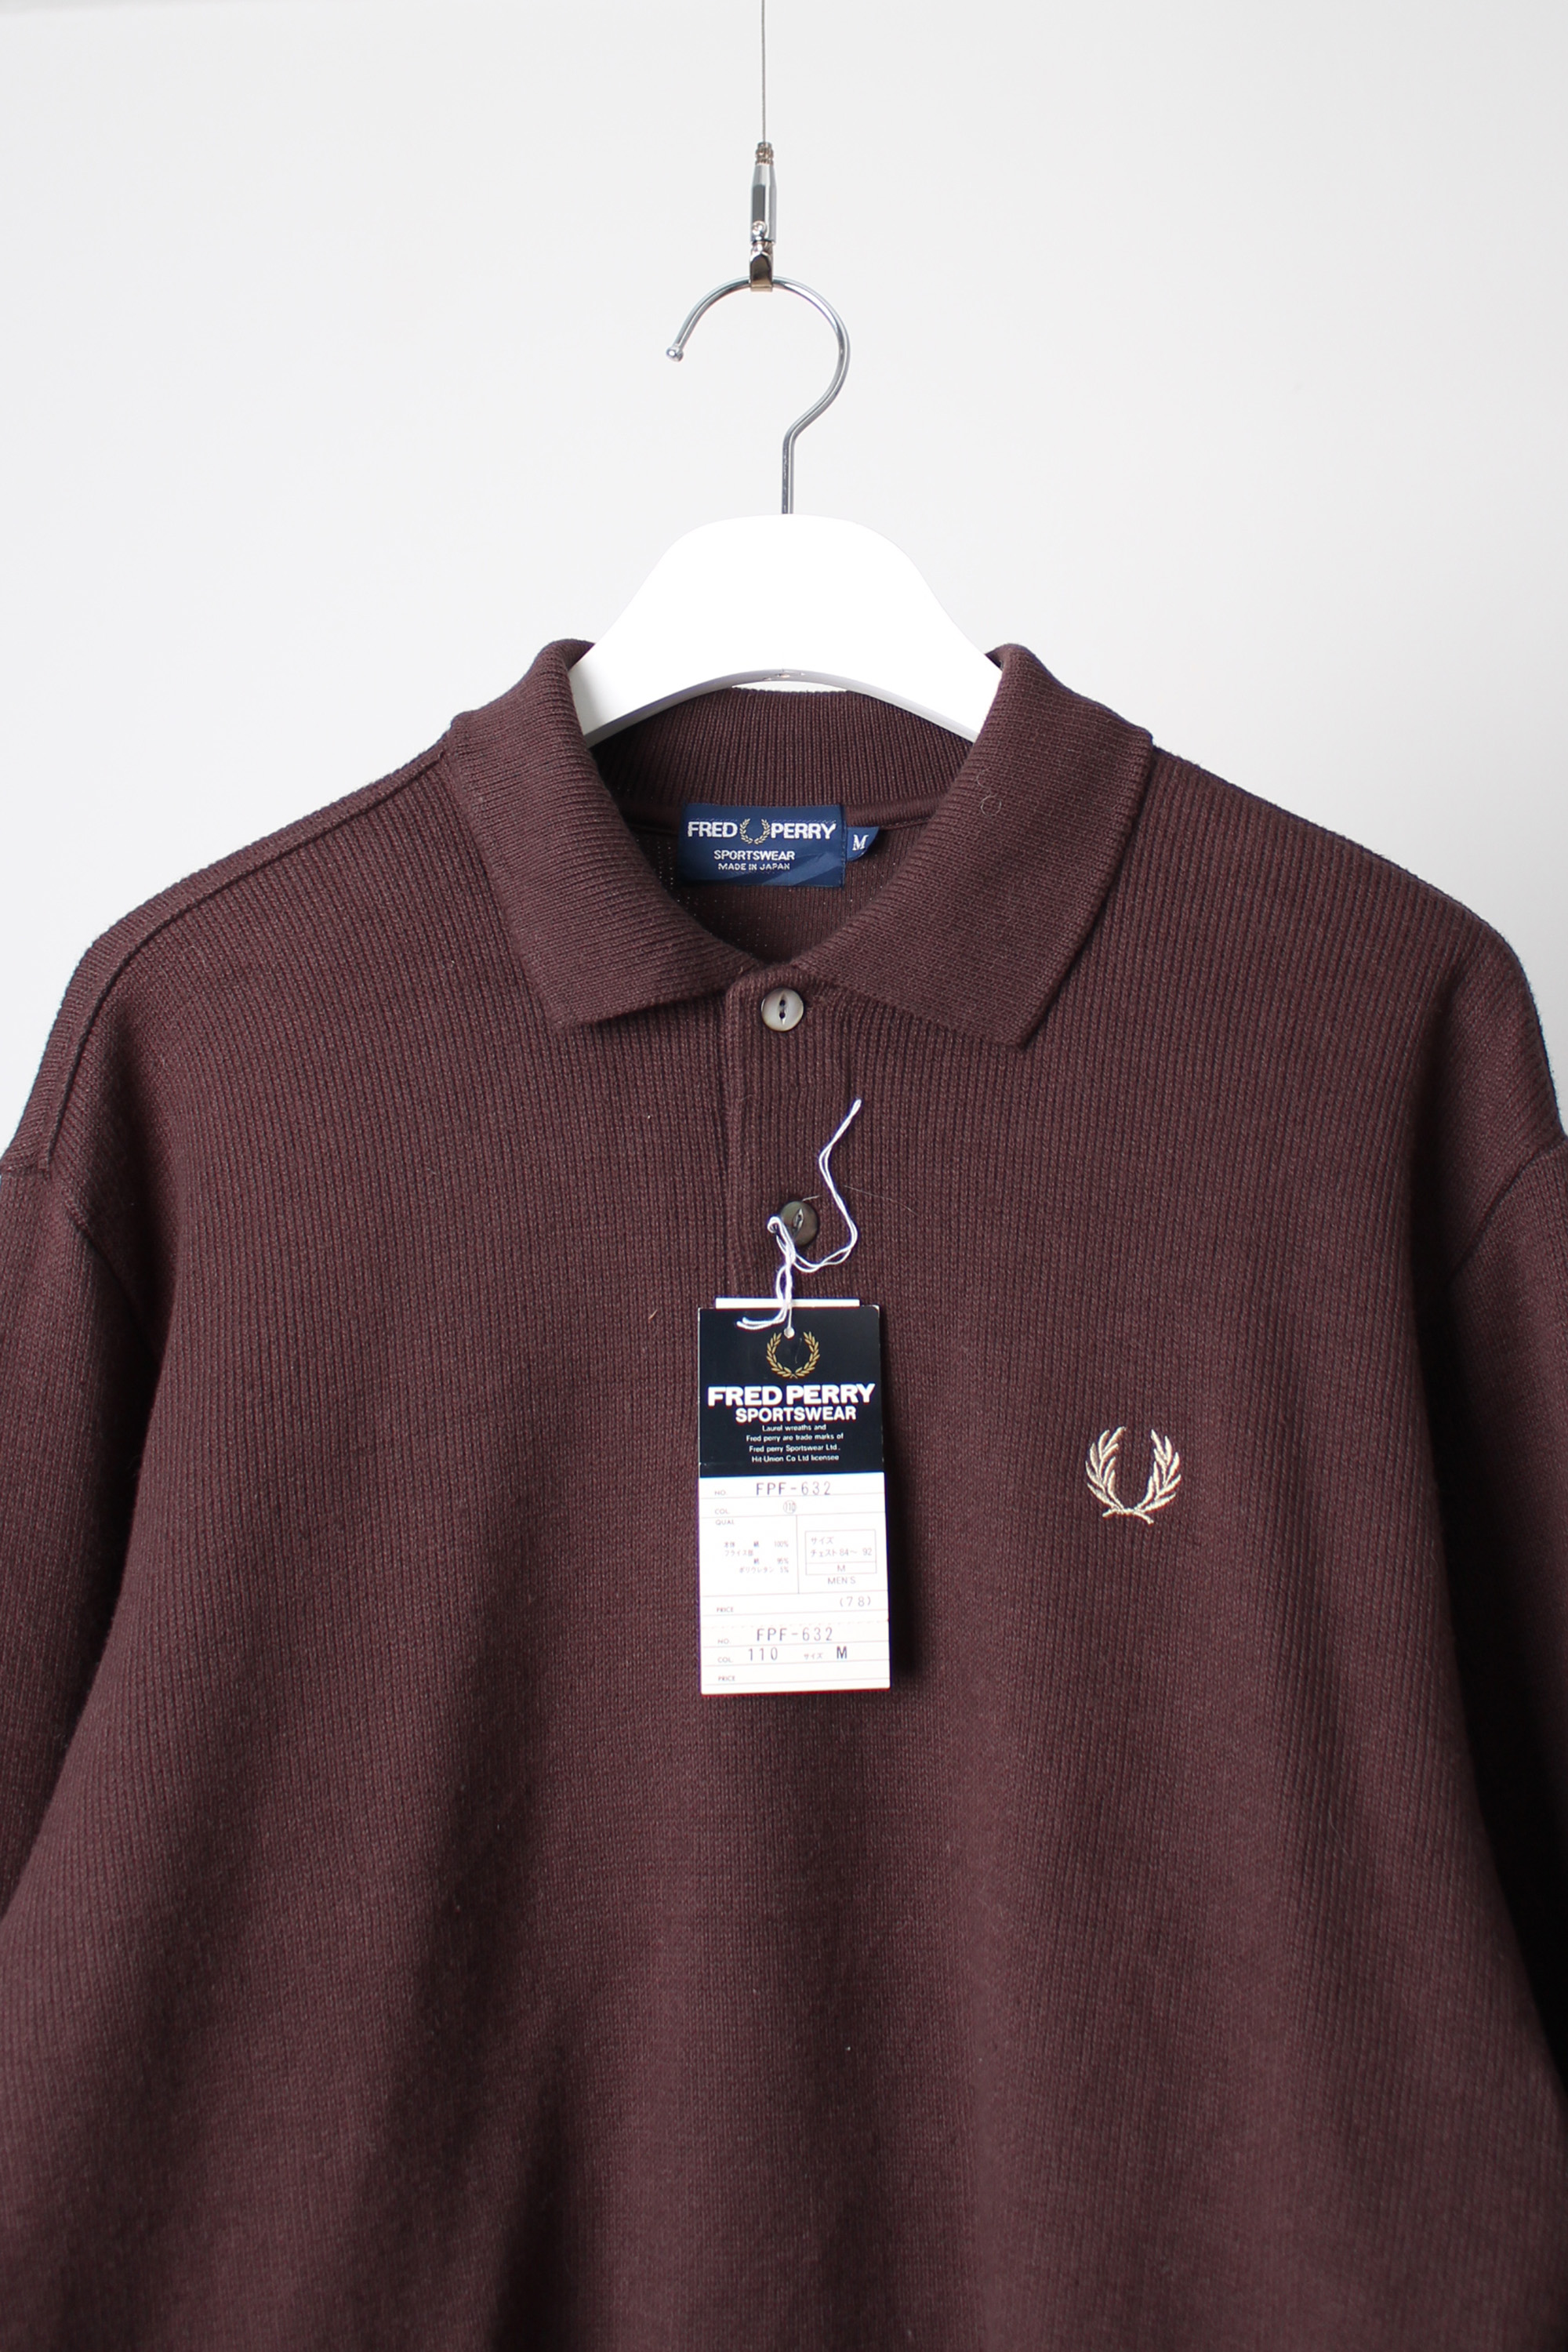 FRED PERRY sweater